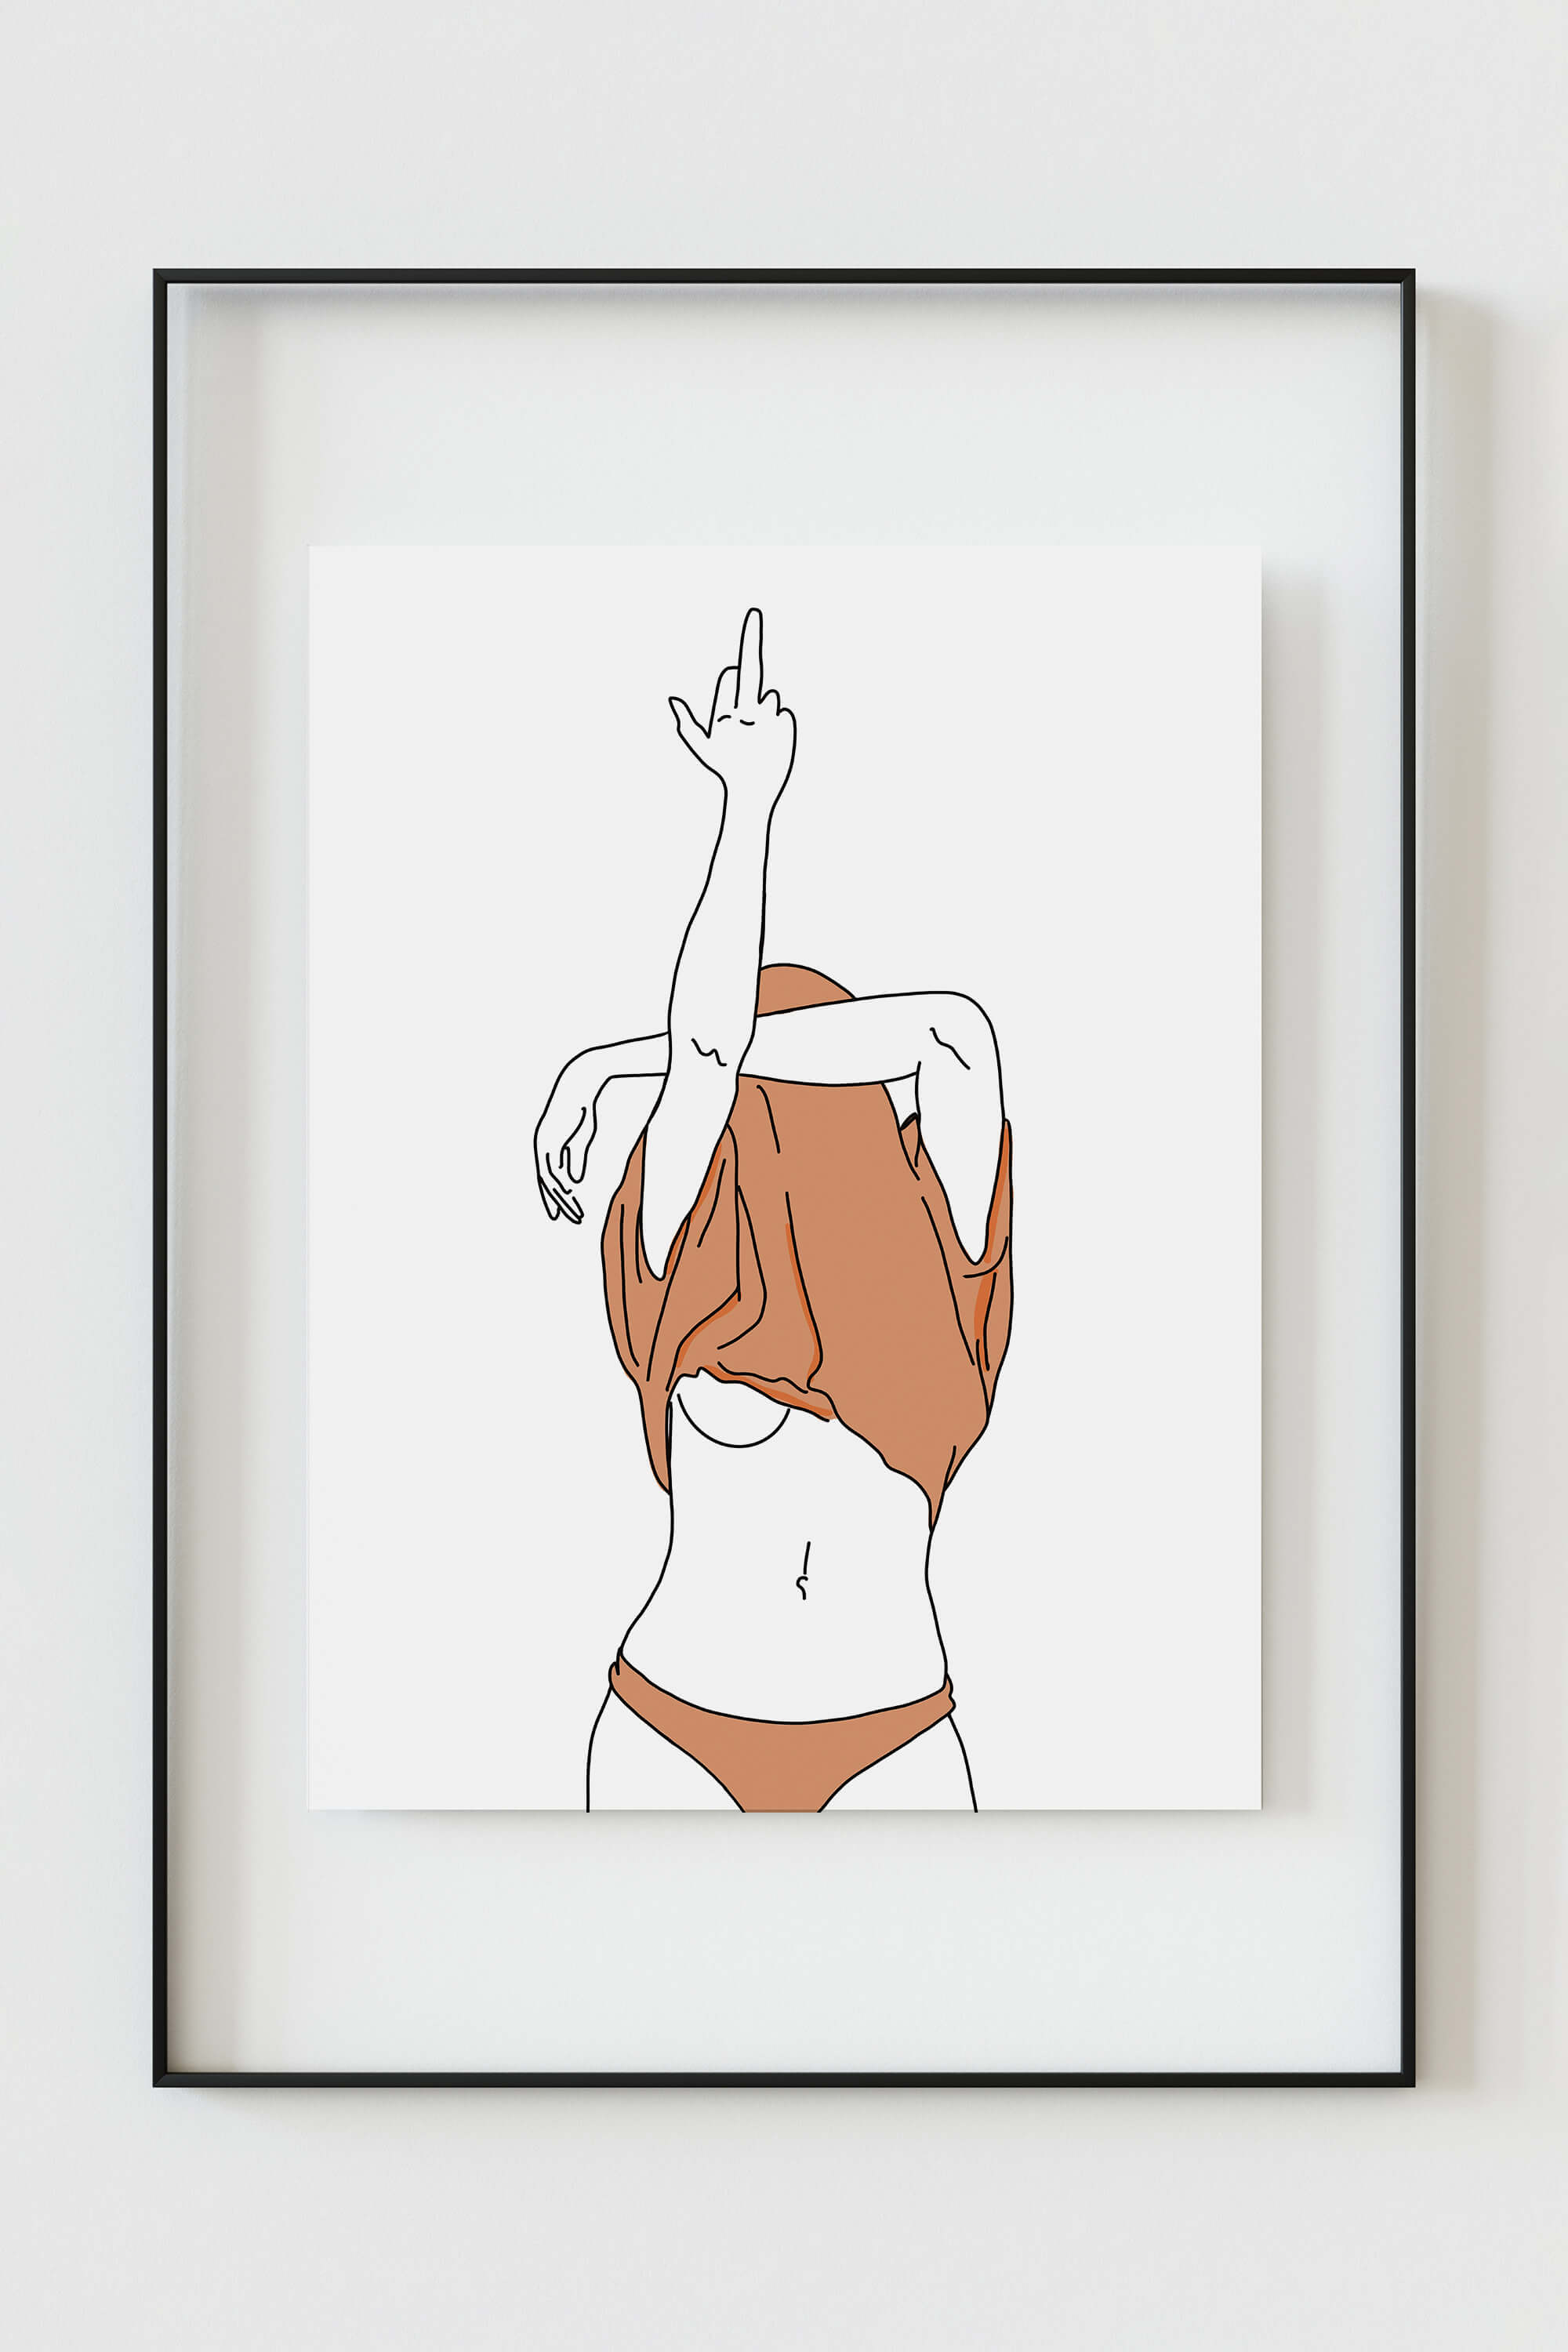 Trendy wall art featuring a stylish woman line drawing for modern living spaces.